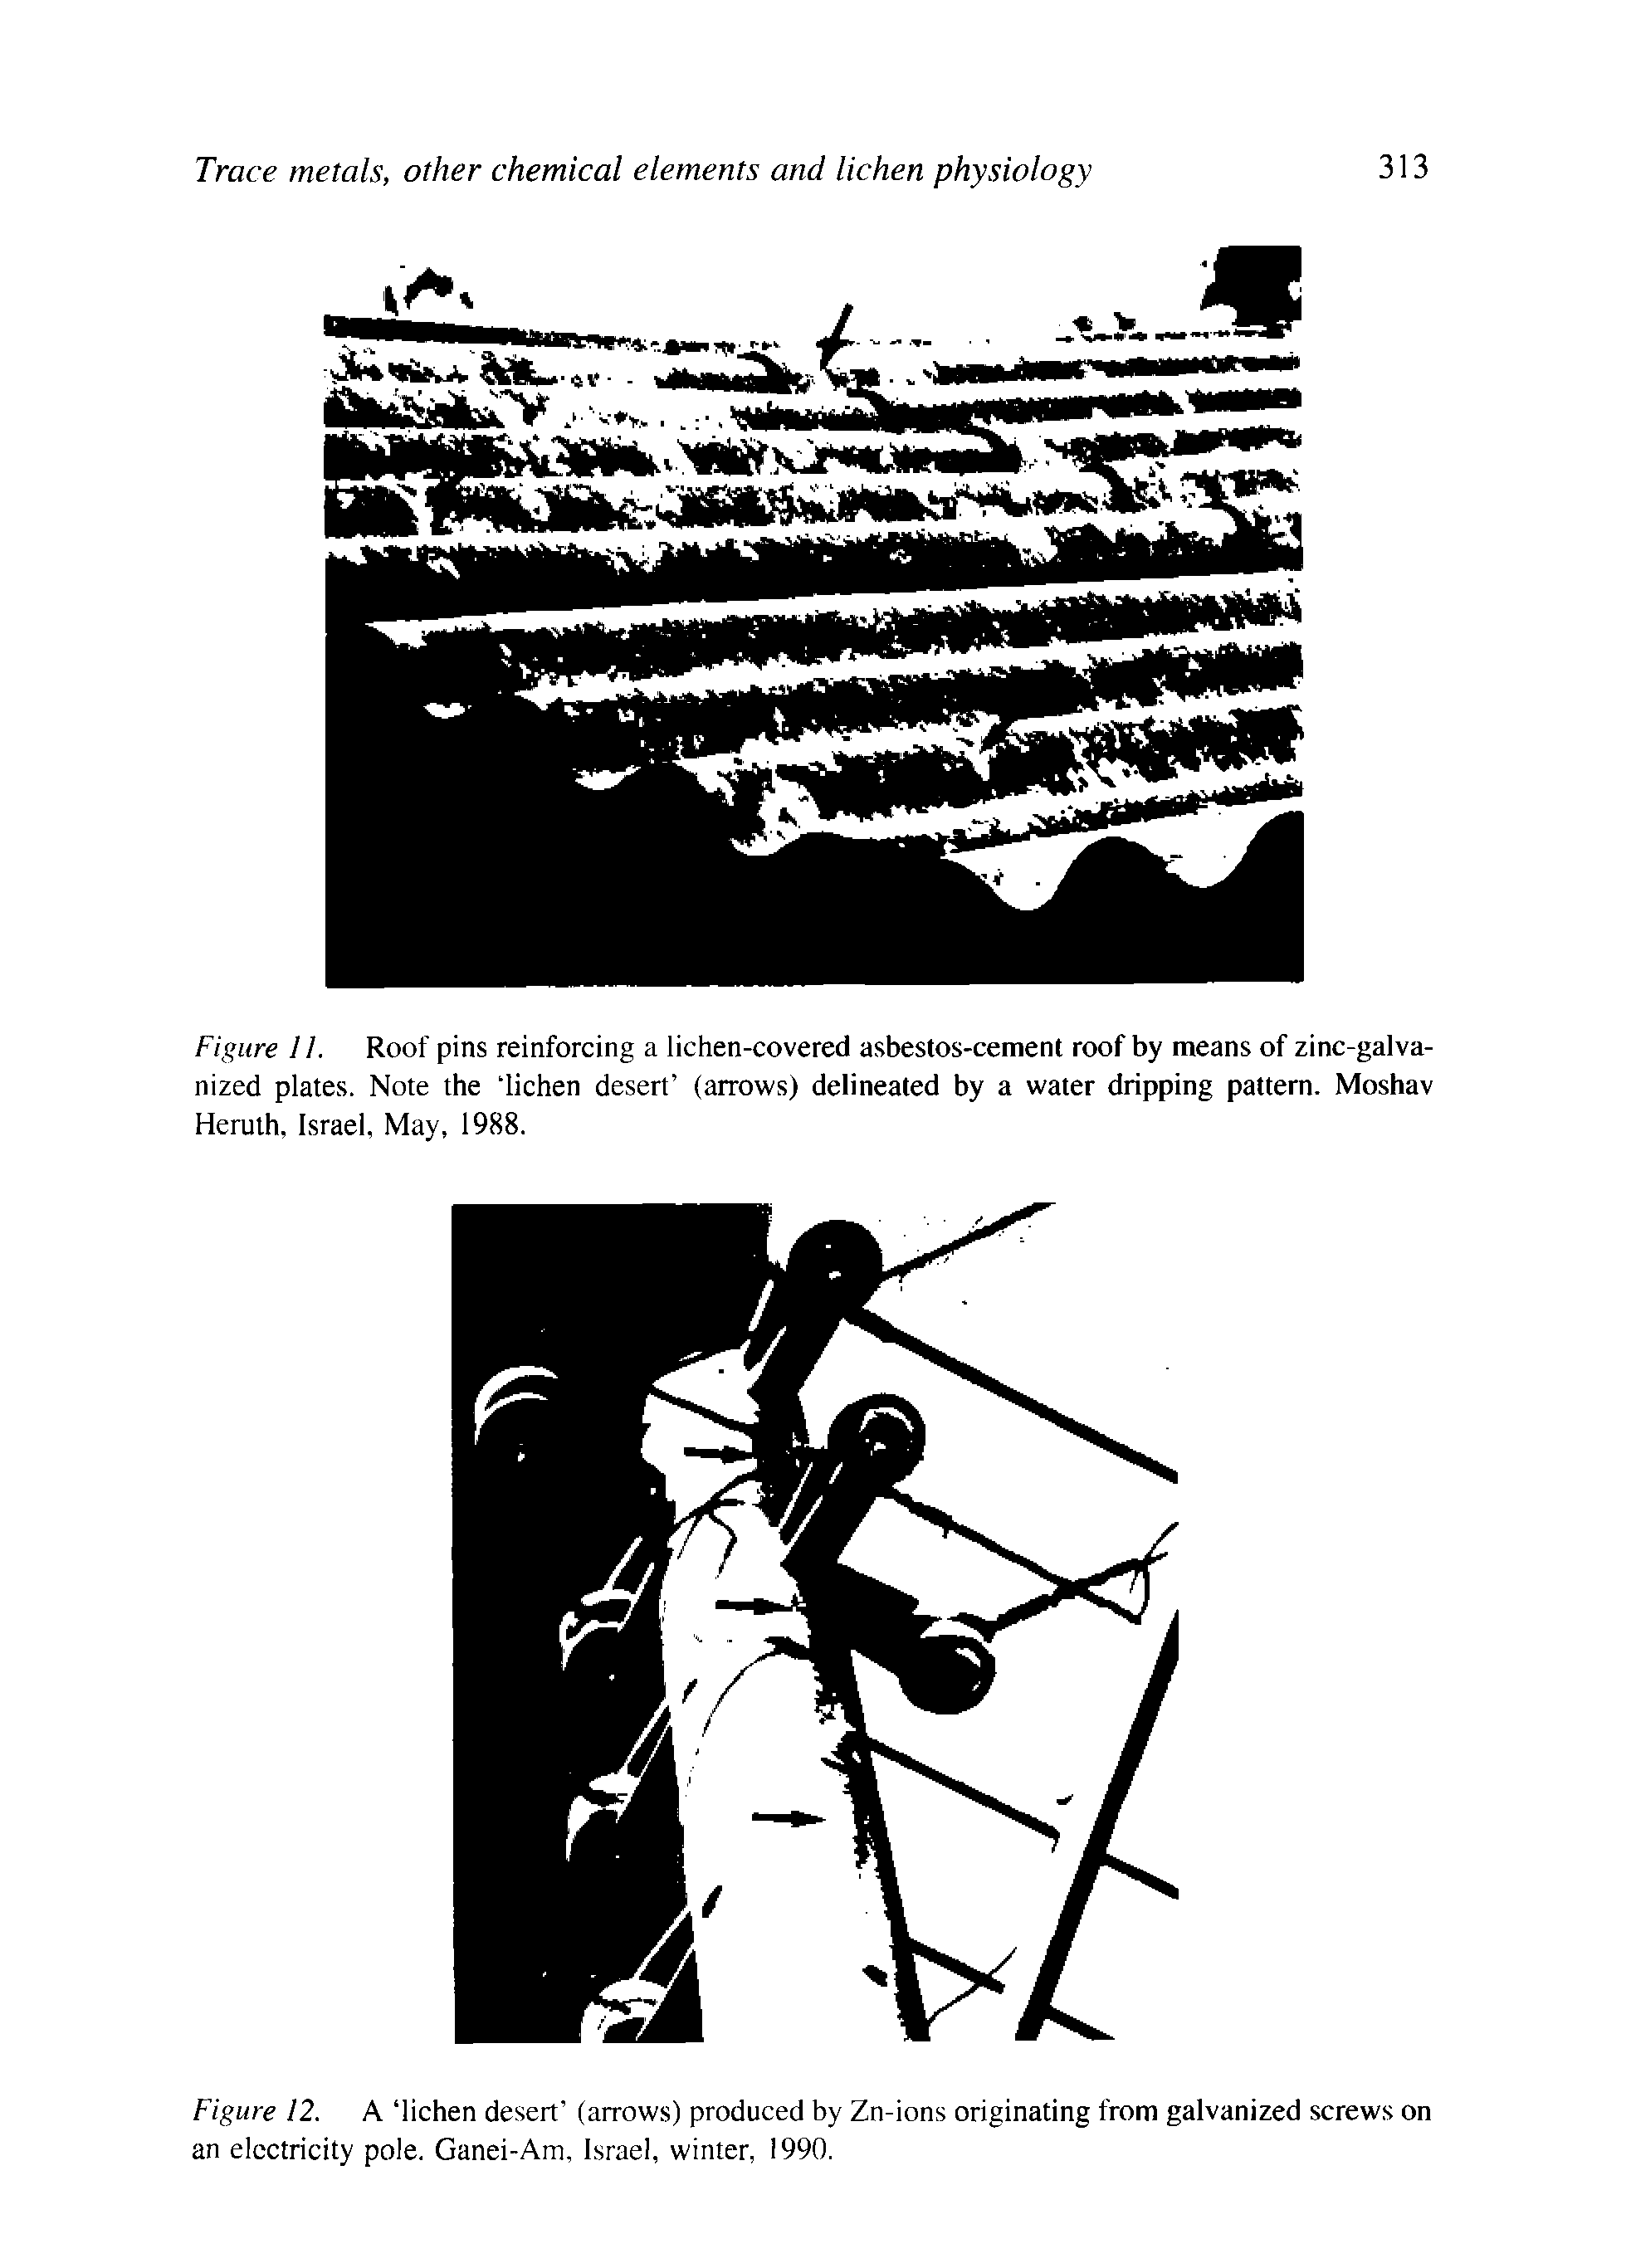 Figure 11. Roof pins reinforcing a lichen-covered asbestos-cement roof by means of zinc-galvanized plates. Note the lichen desert (arrows) delineated by a water dripping pattern. Moshav Herulh, Israel, May, 1988.